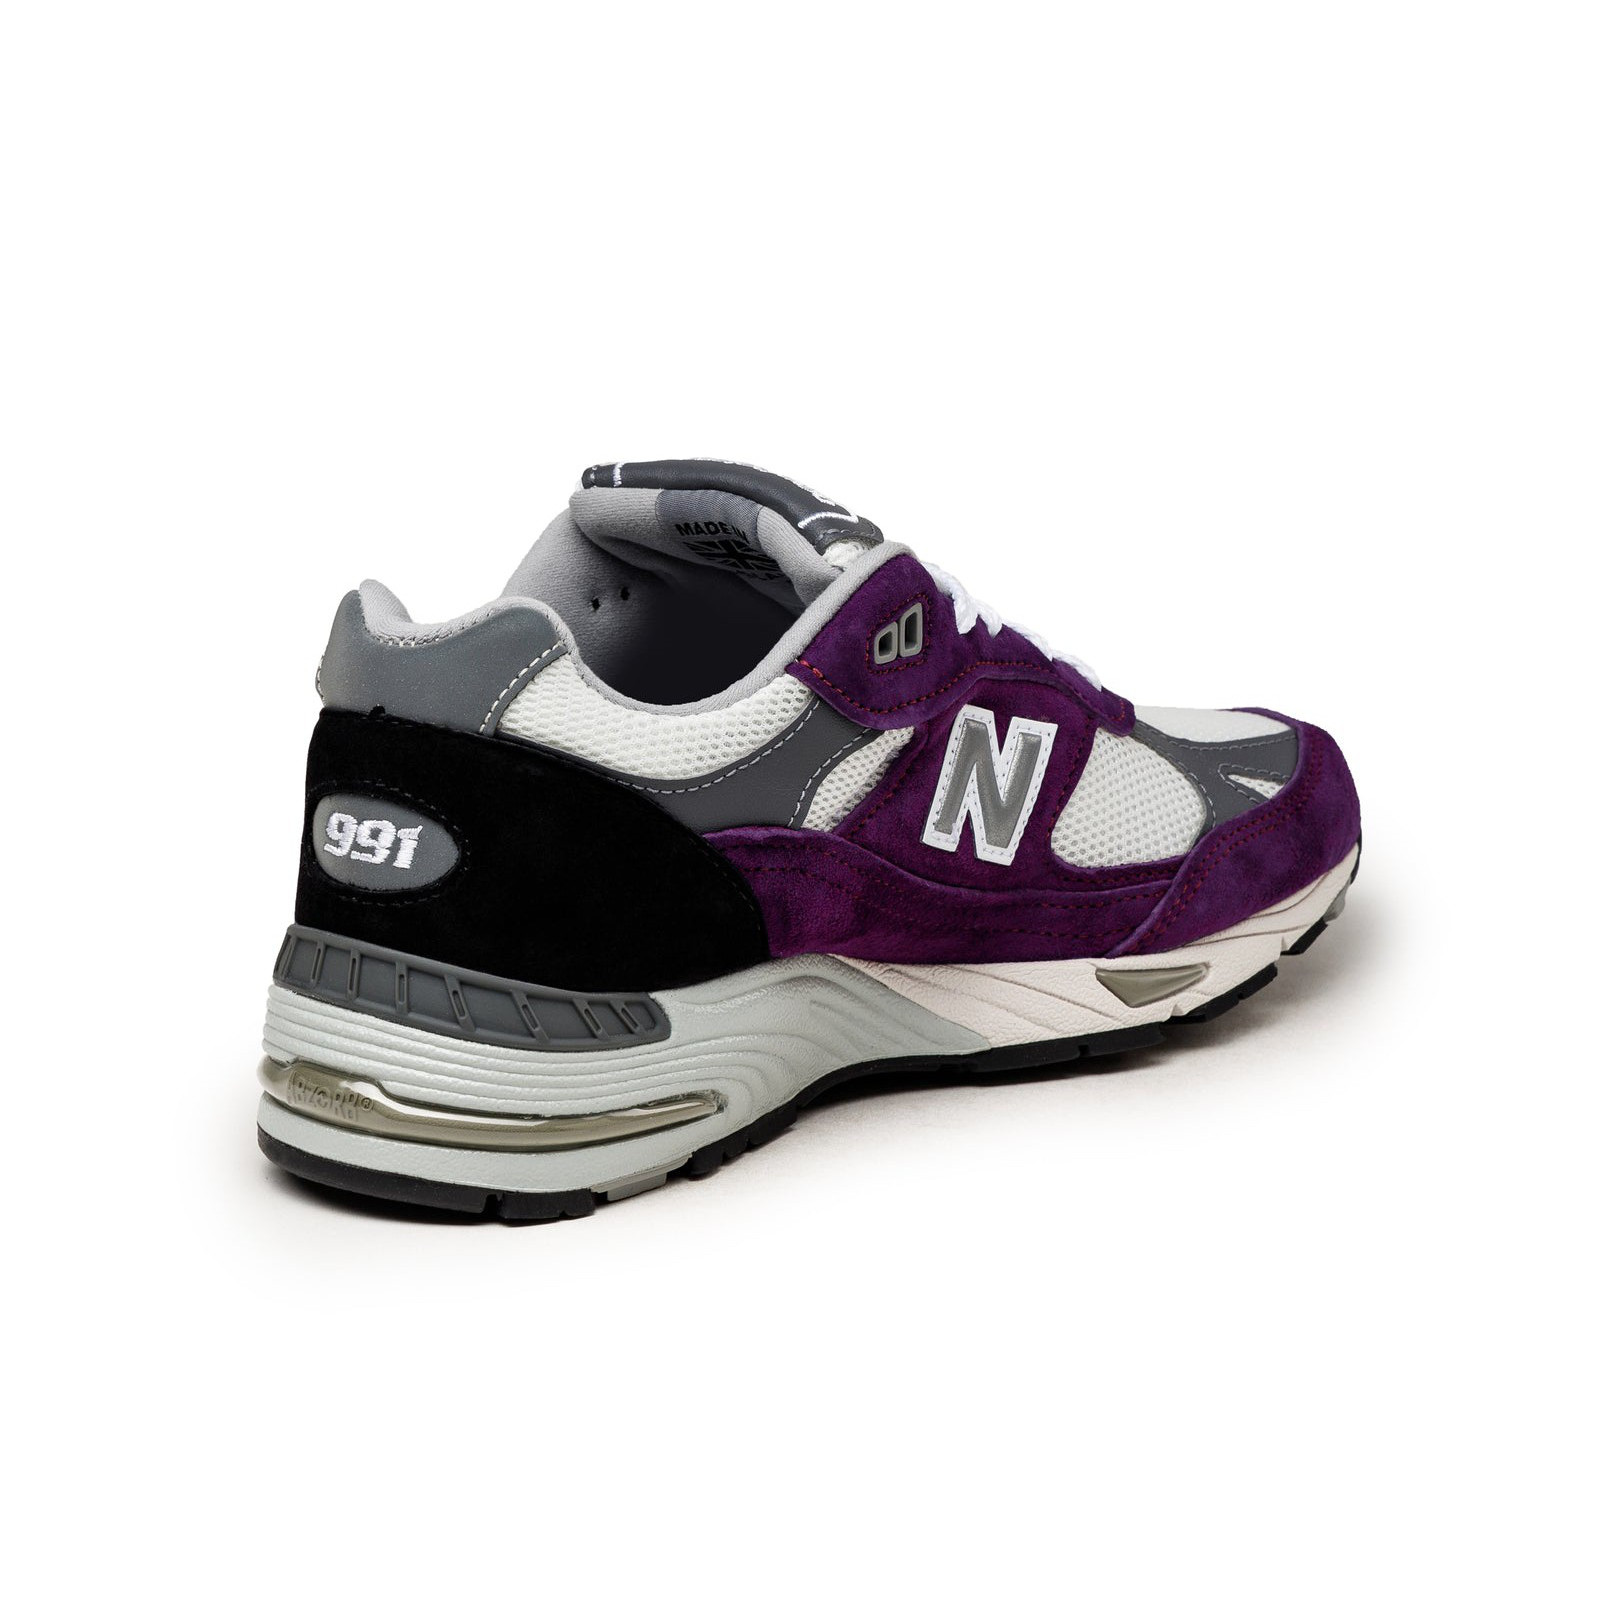 New Balance W991PUK
Made in England
Grape Juice / Alloy